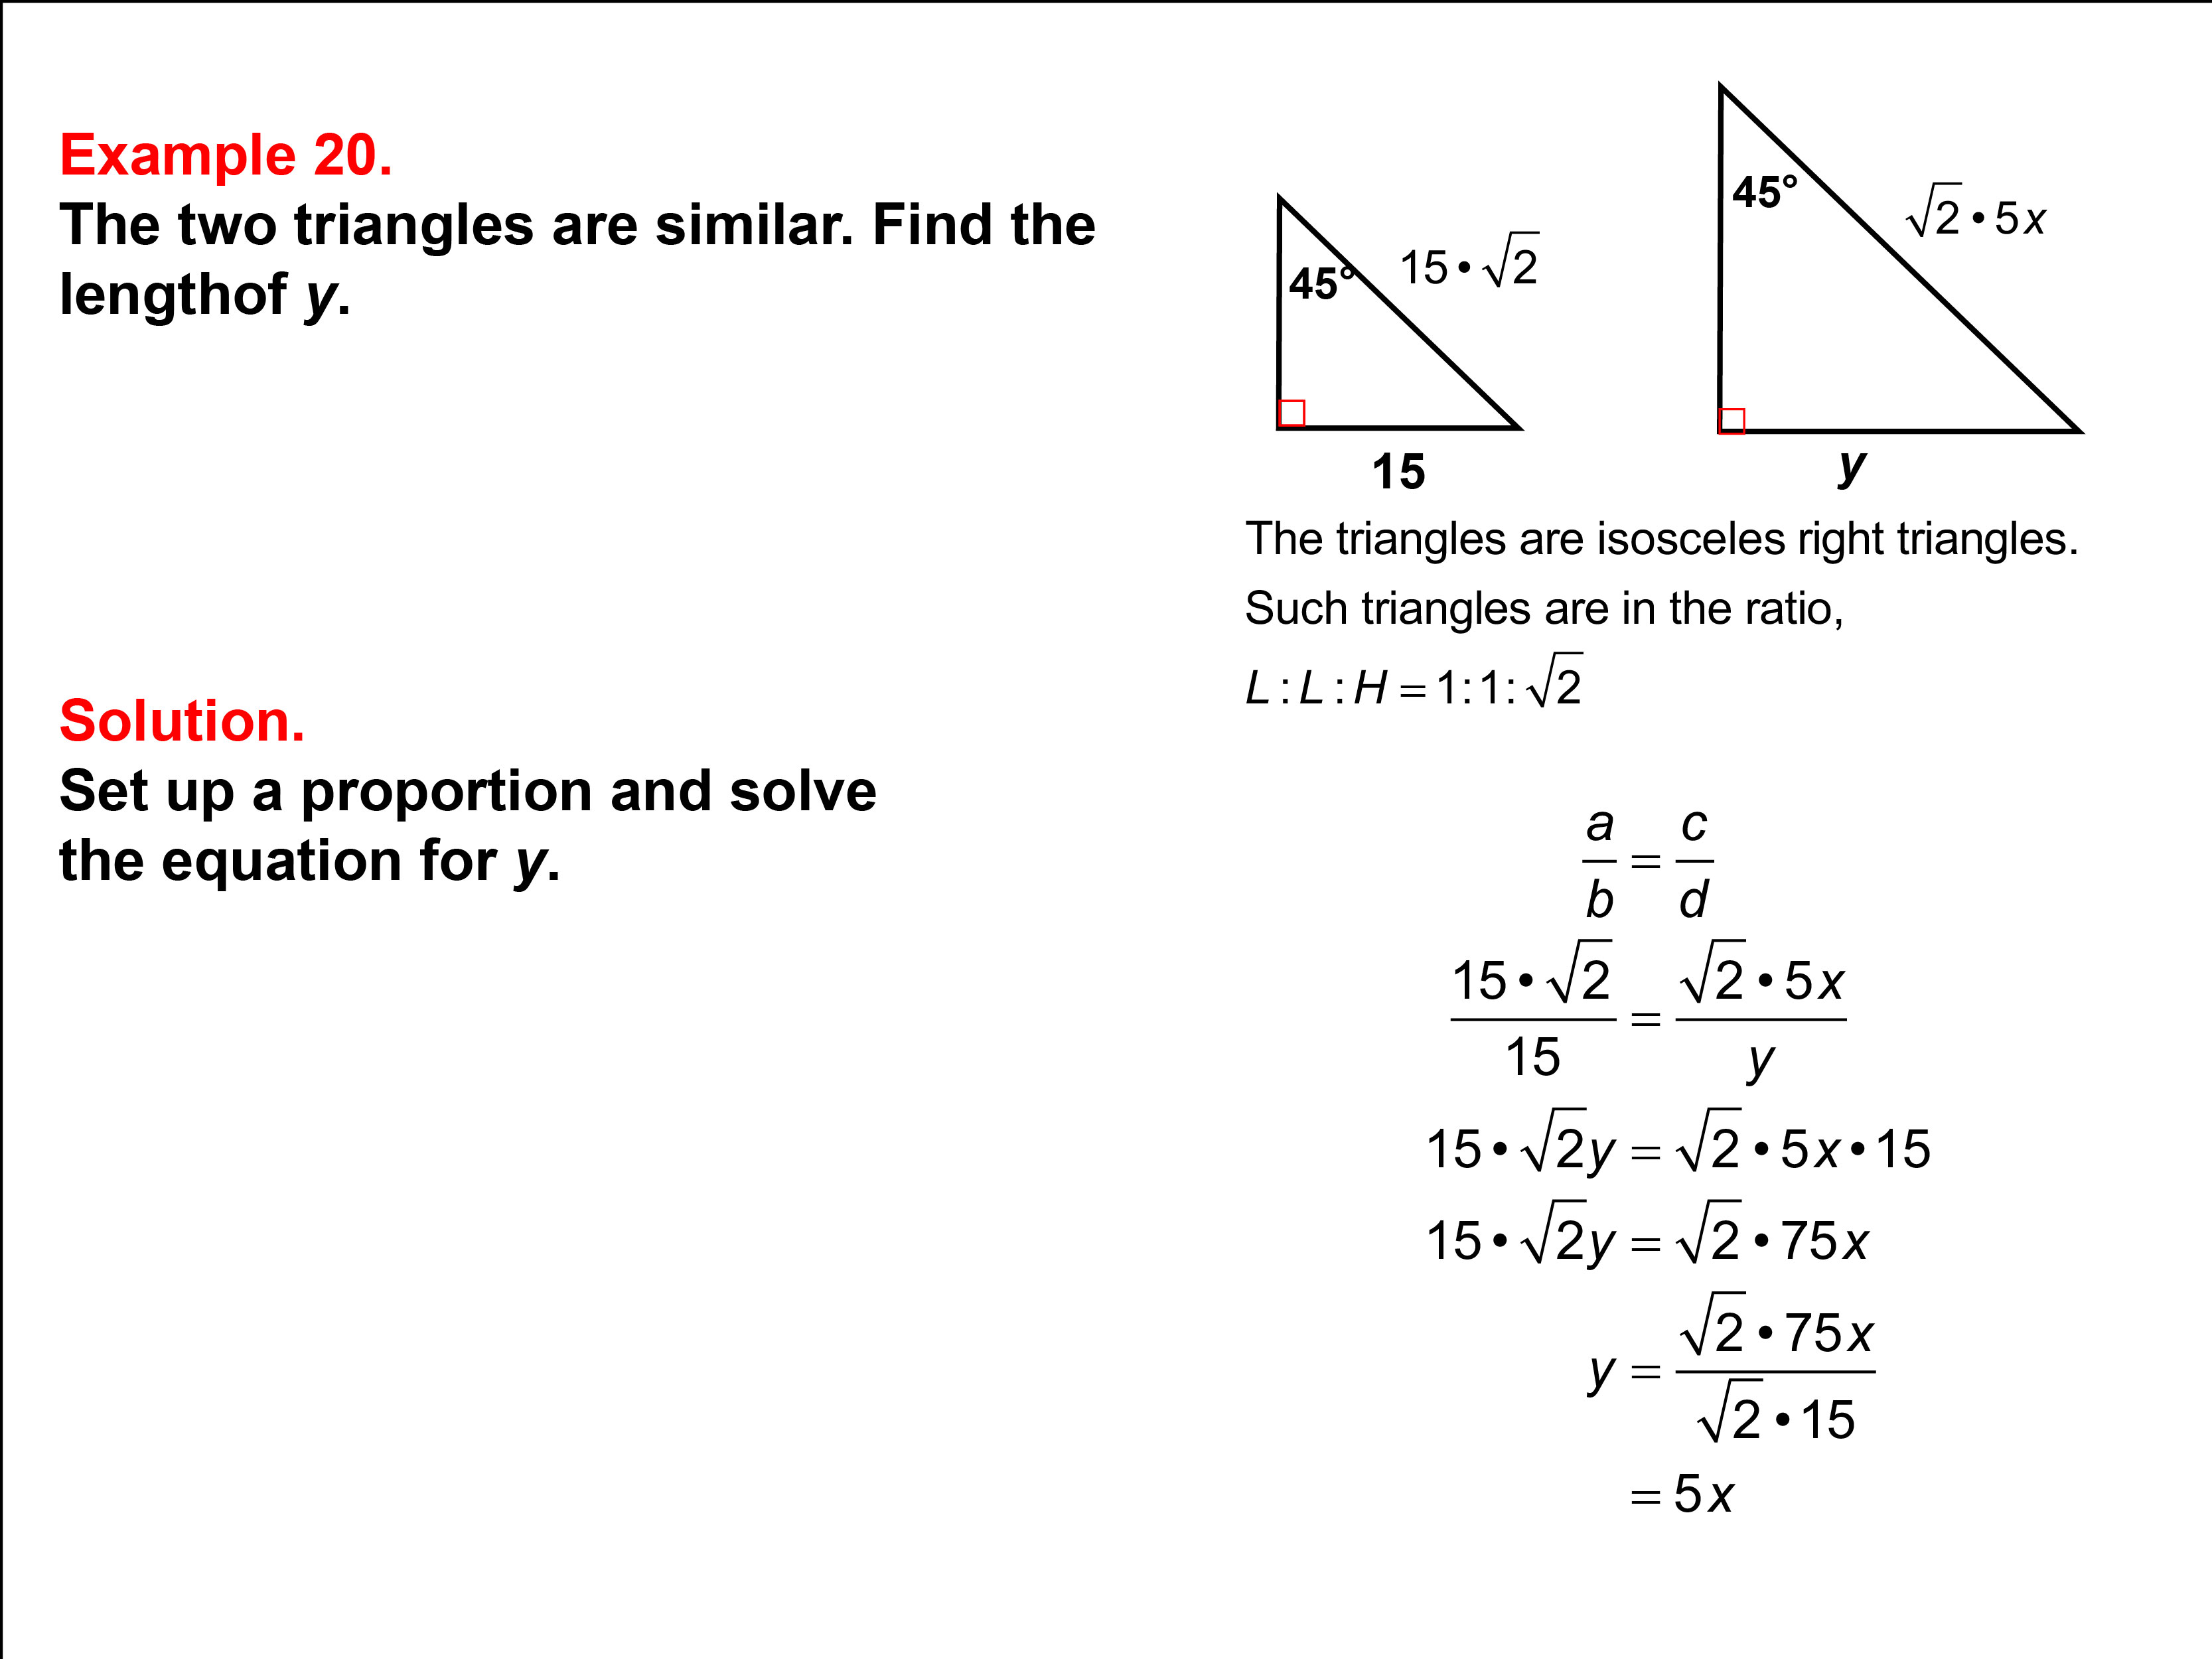 Solving Proportions: Example 20. Given two similar isosceles right triangles, solving a proportion to find the length of an unknown side, when all side lengths are expressed as numbers and variables.